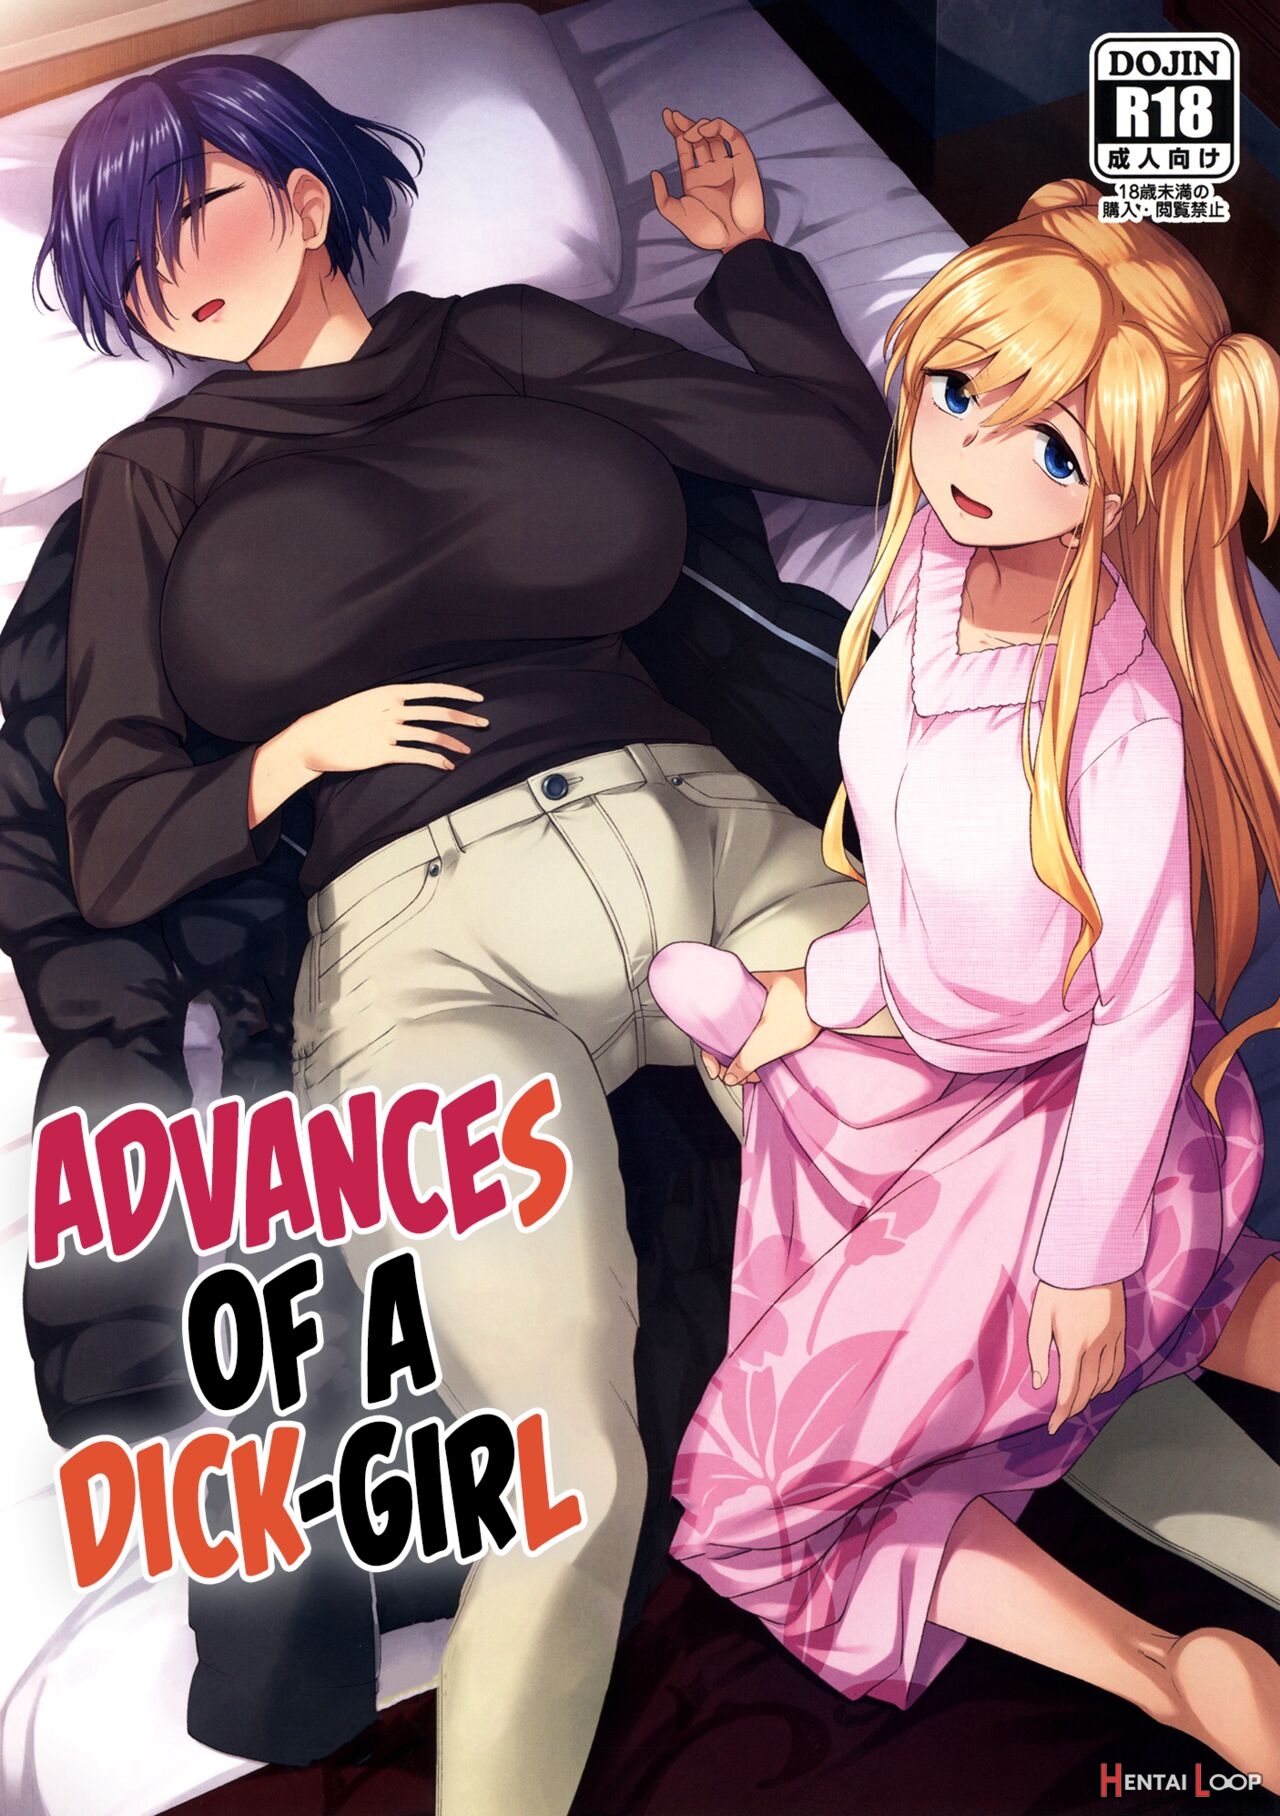 Anime girls with dick